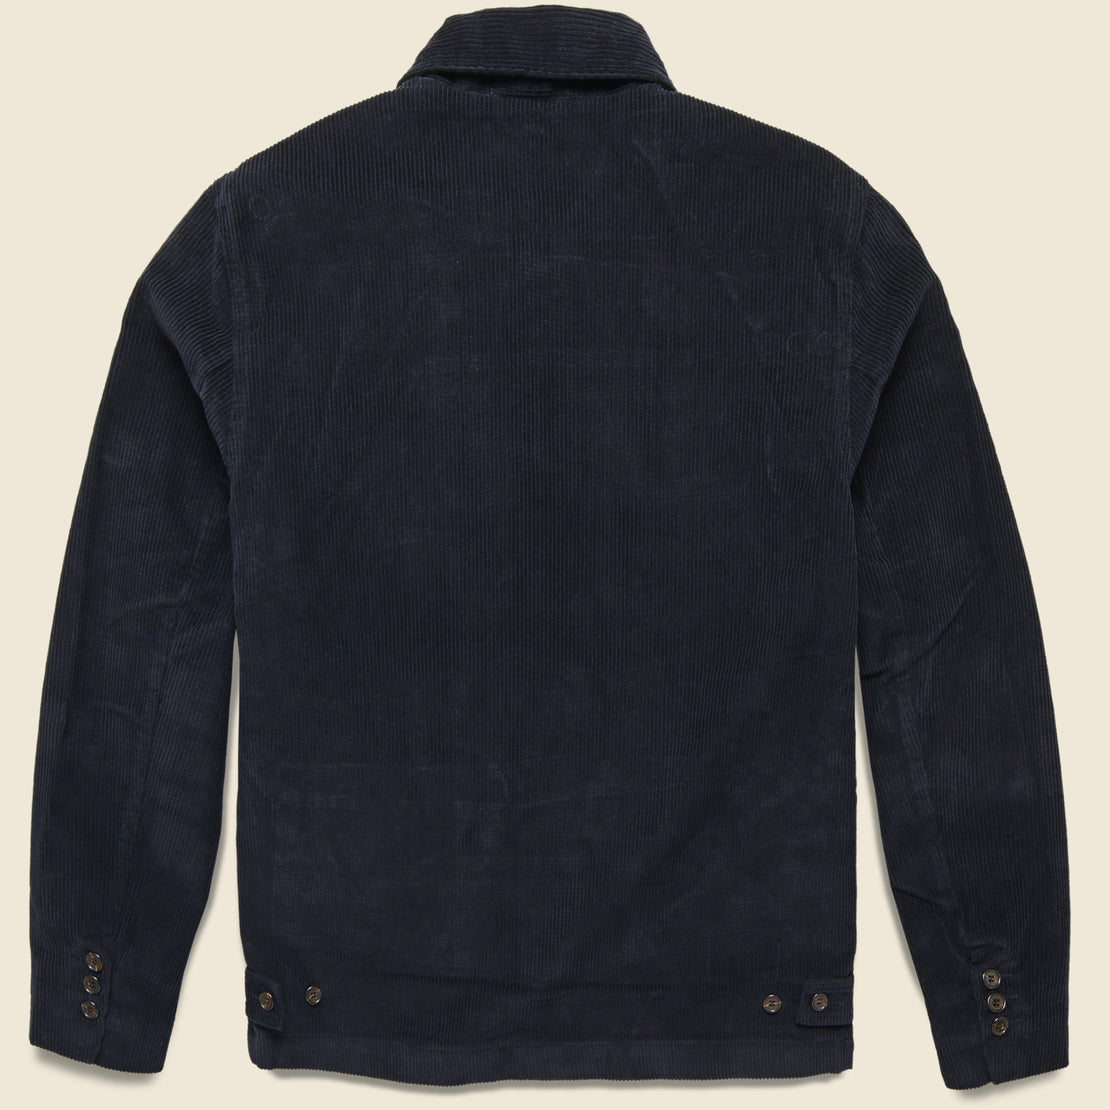 Warmus II Jacket - Navy Cord - Universal Works - STAG Provisions - Outerwear - Coat / Jacket